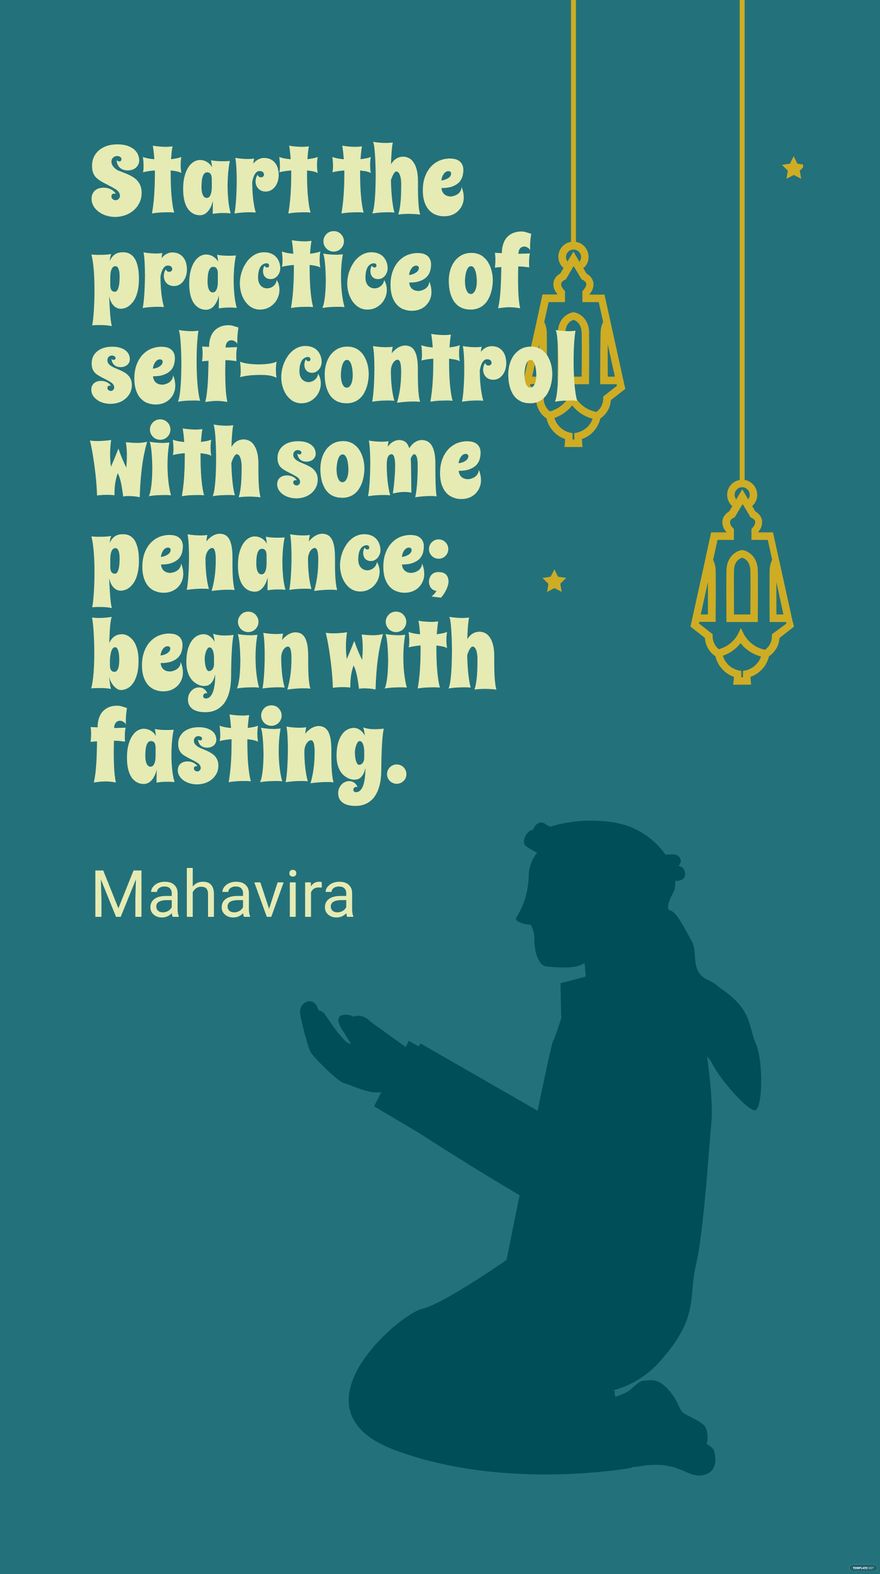 Free Mahavira - Start the practice of self-control with some penance; begin with fasting. in JPG